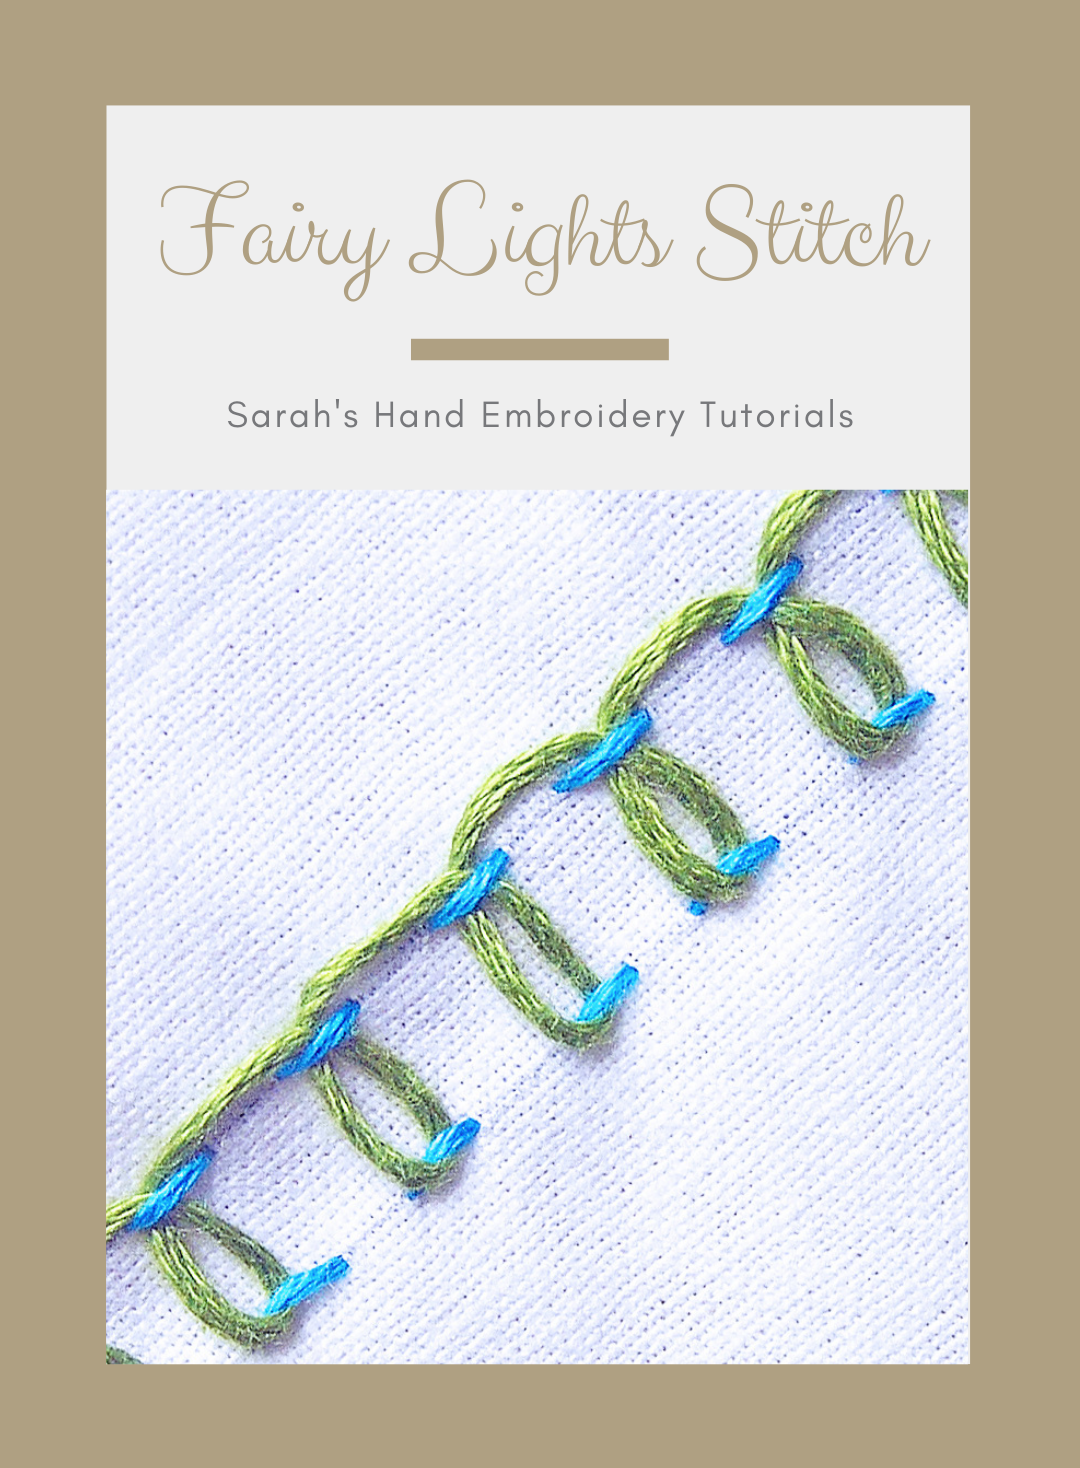 Best Selling Hand Embroidery Books - Sarah's Hand Embroidery Tutorials